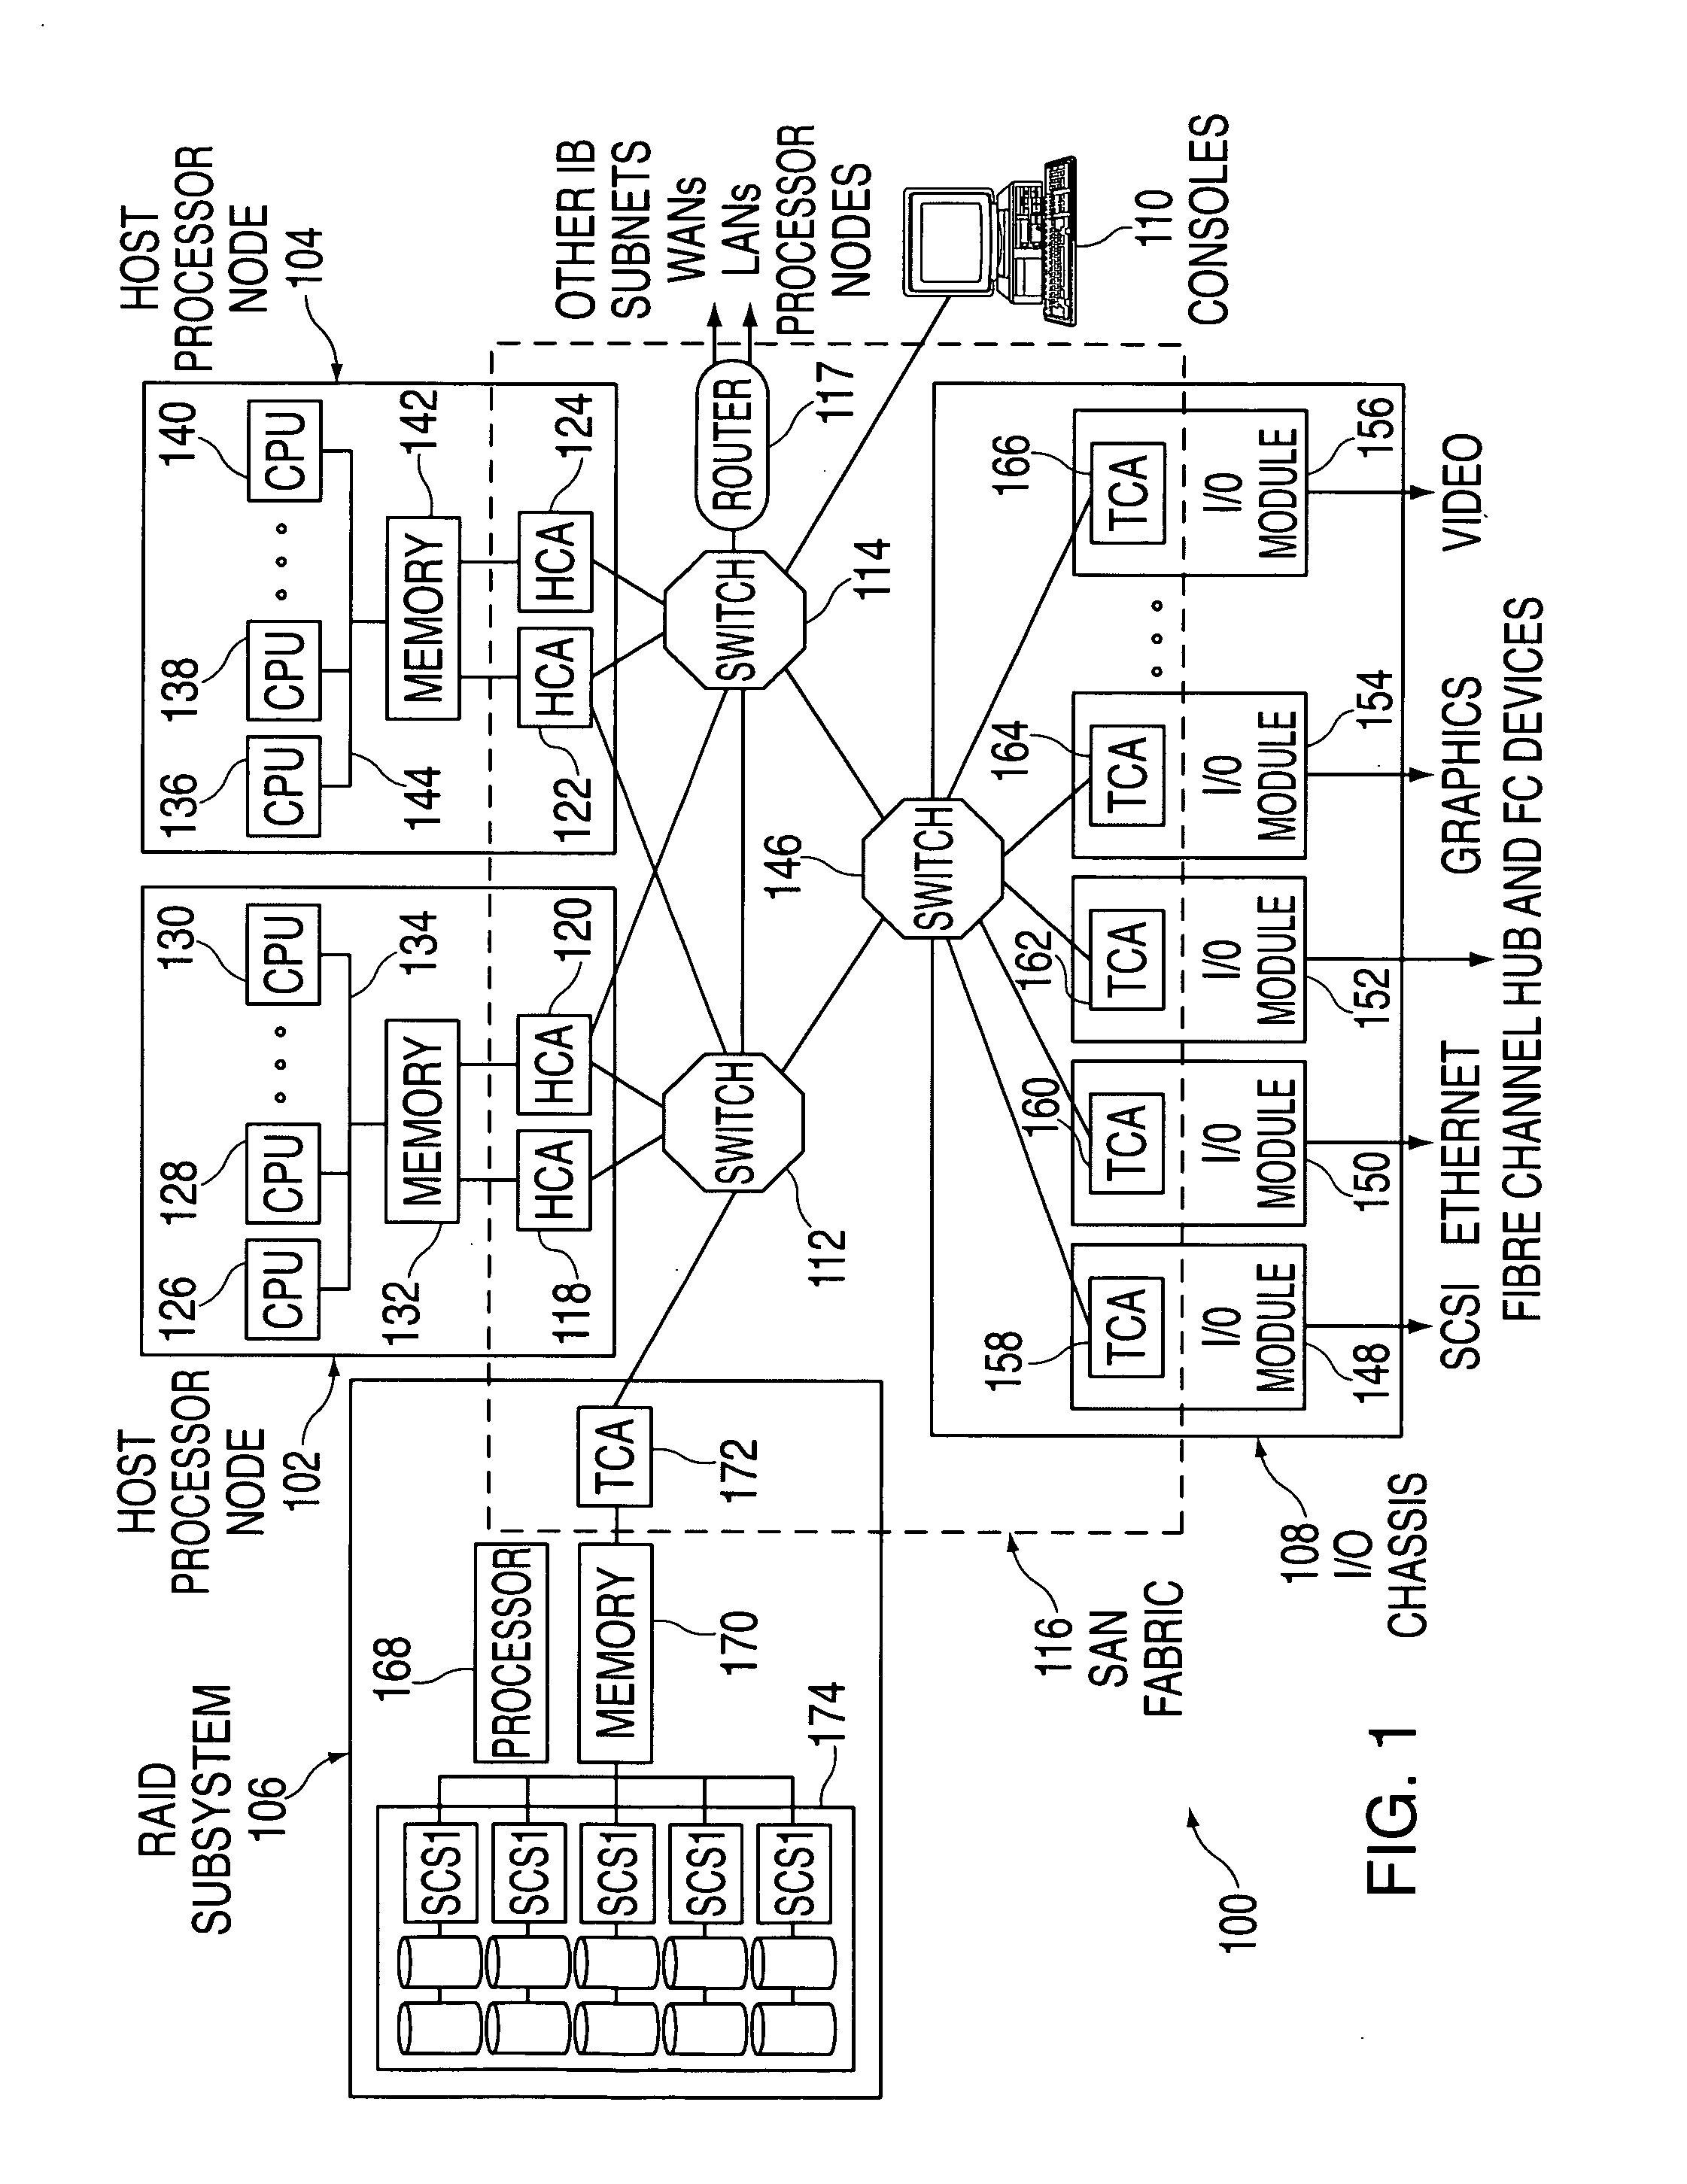 System, method, and storage medium for shared key index space for memory regions